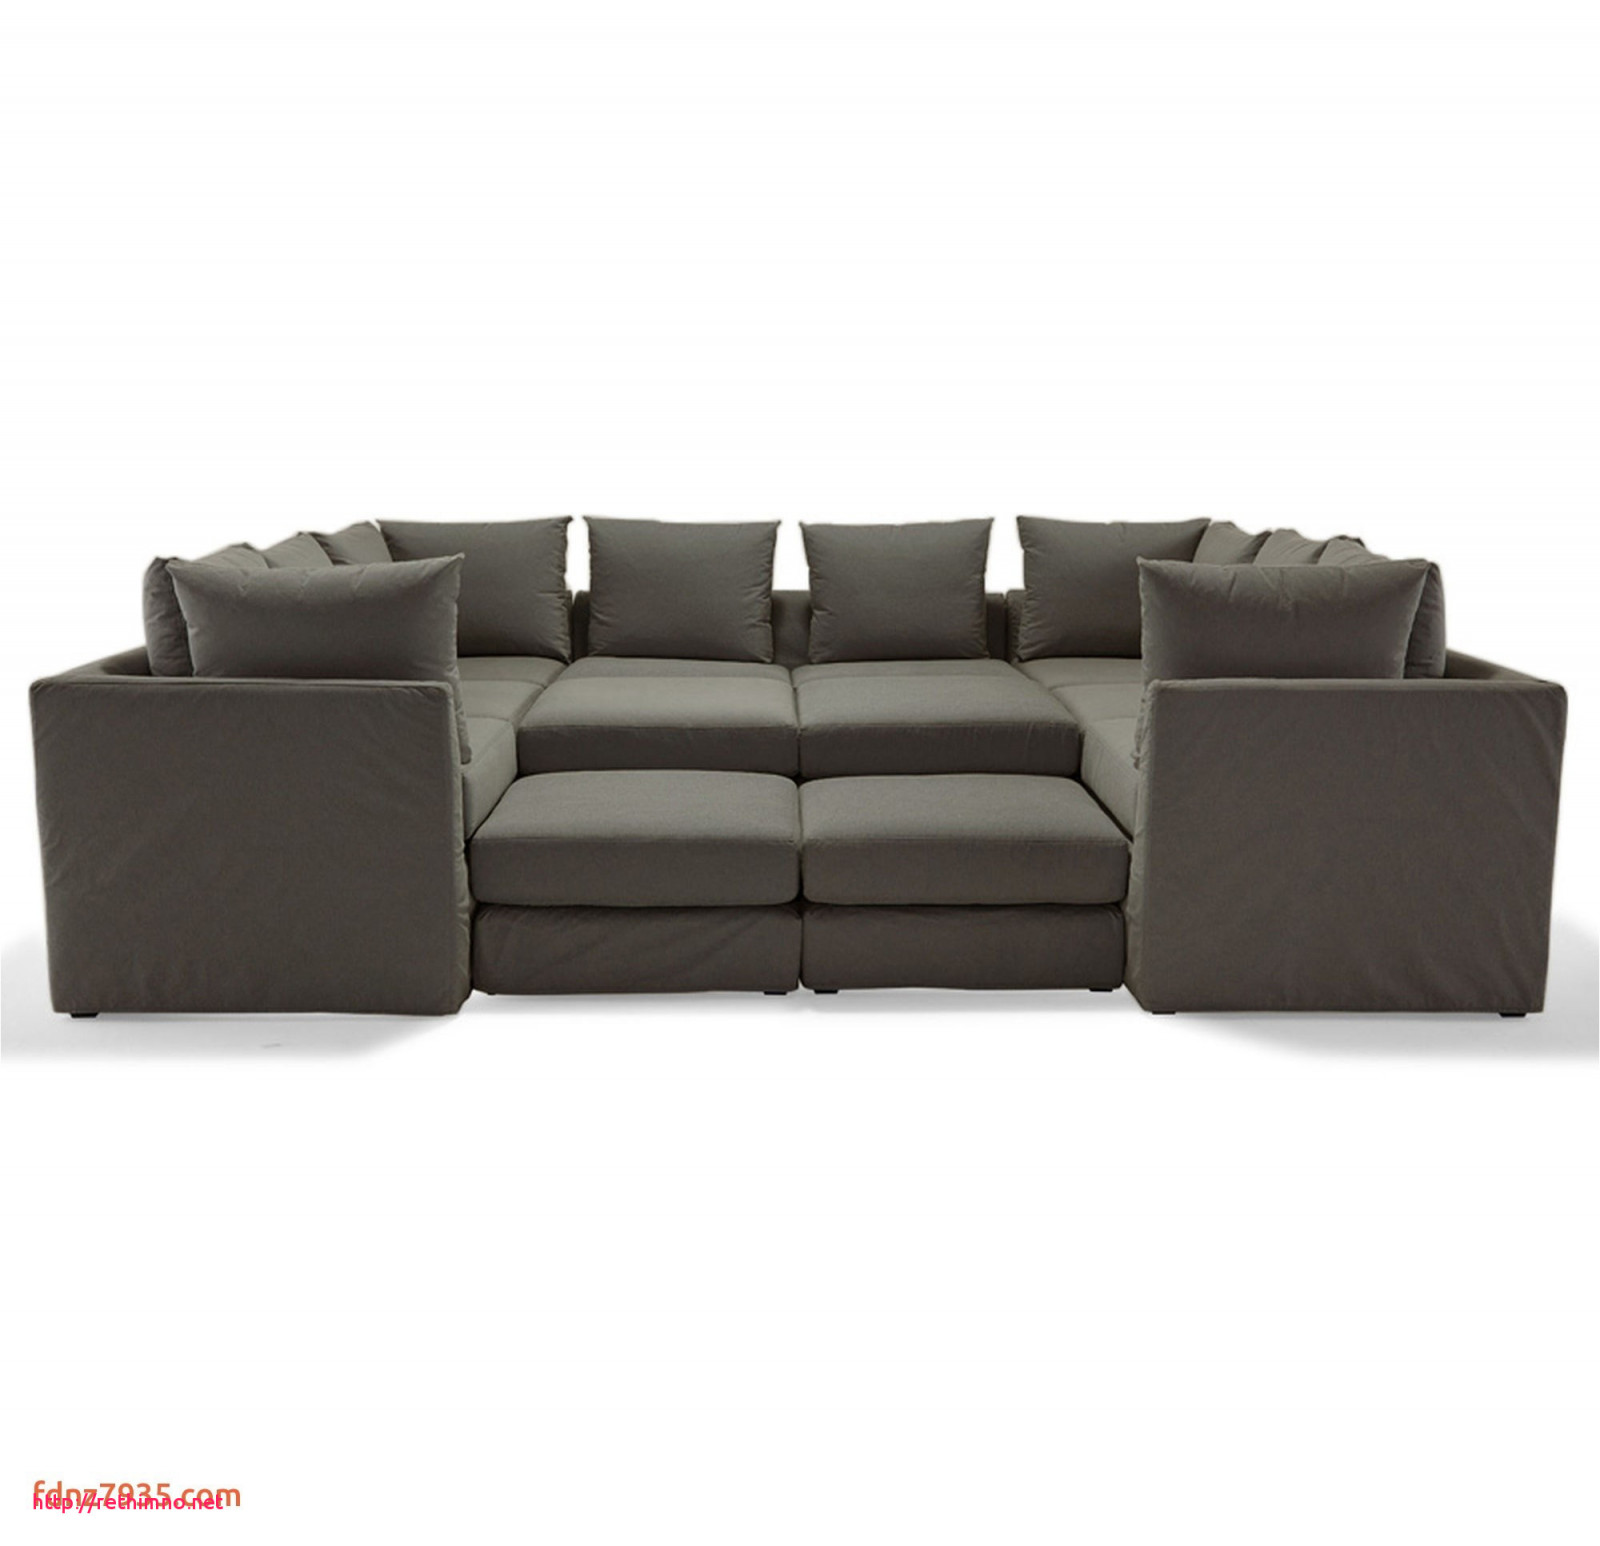 sectional couch living spaces new fresh designer sectional sofas of sectional couch living spaces